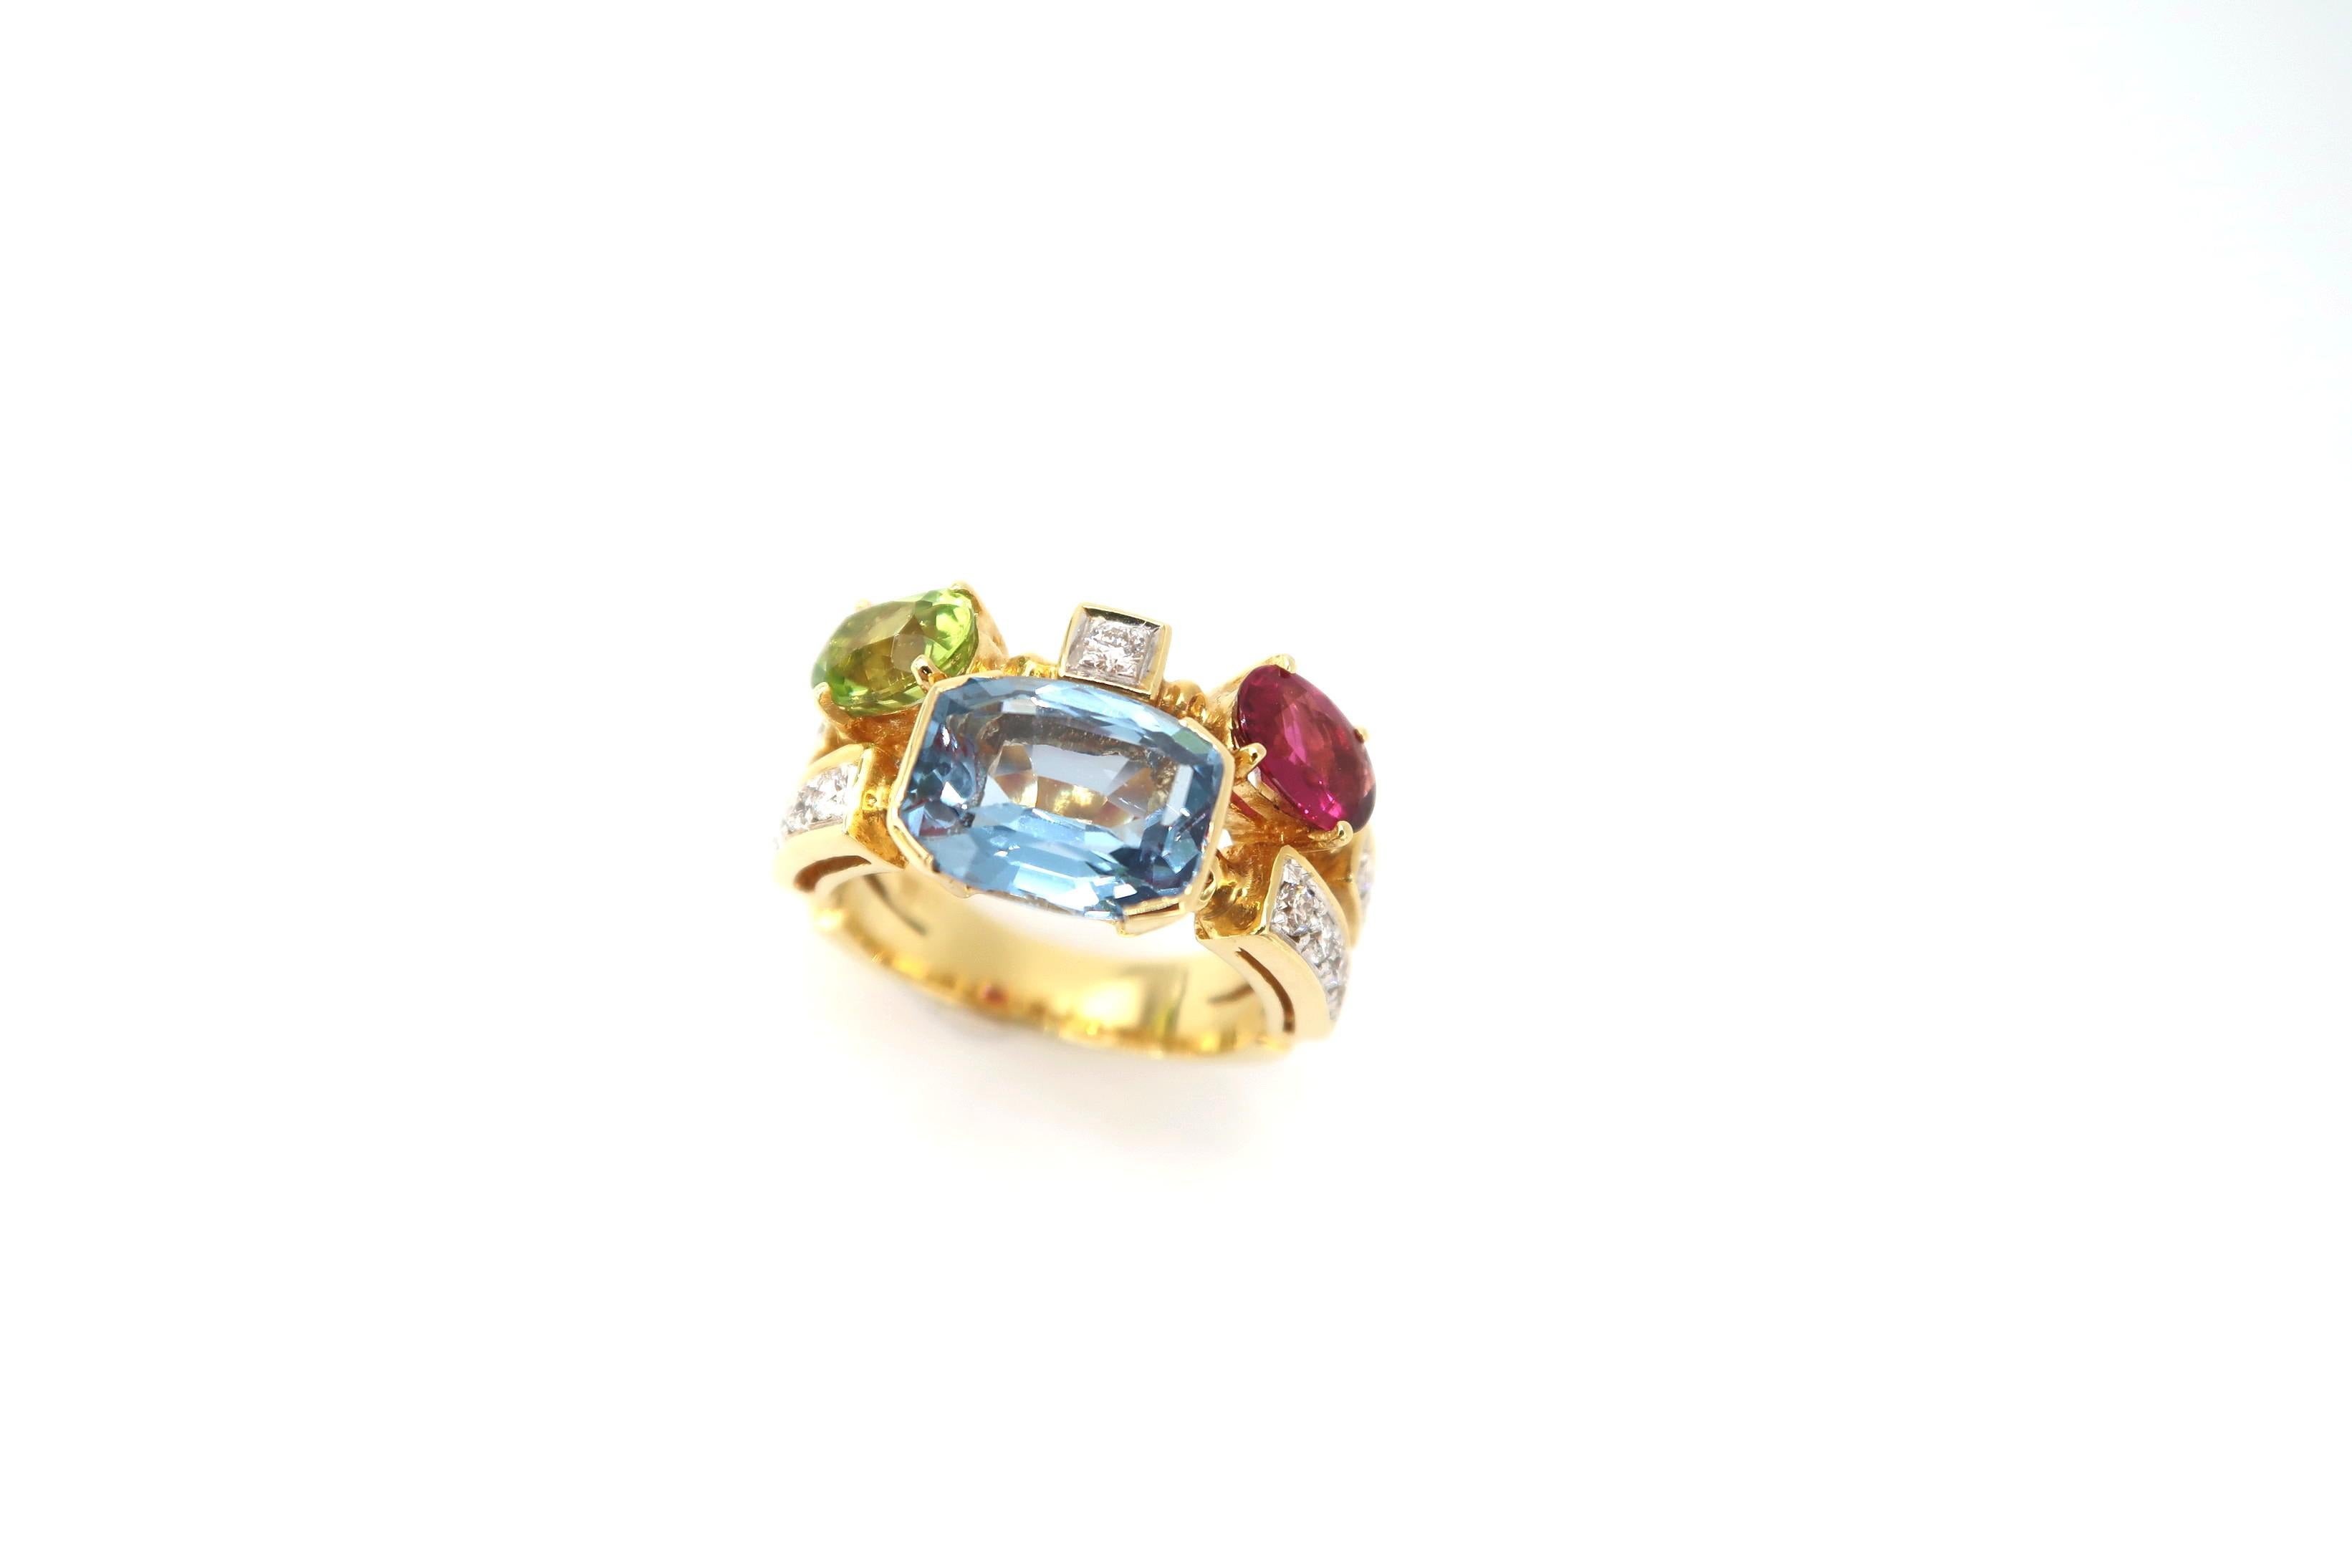 2 Band Blue Topaz, Pink Tourmaline and Peridot Ring with Diamond in 18K Gold

Should you wish to have the ring resized, please kindly let us know upon checkout.

Ring Size : US6, 52

Diamond : 0.96ct.
Blue Topaz, Pink Tourmaline and Peridot :